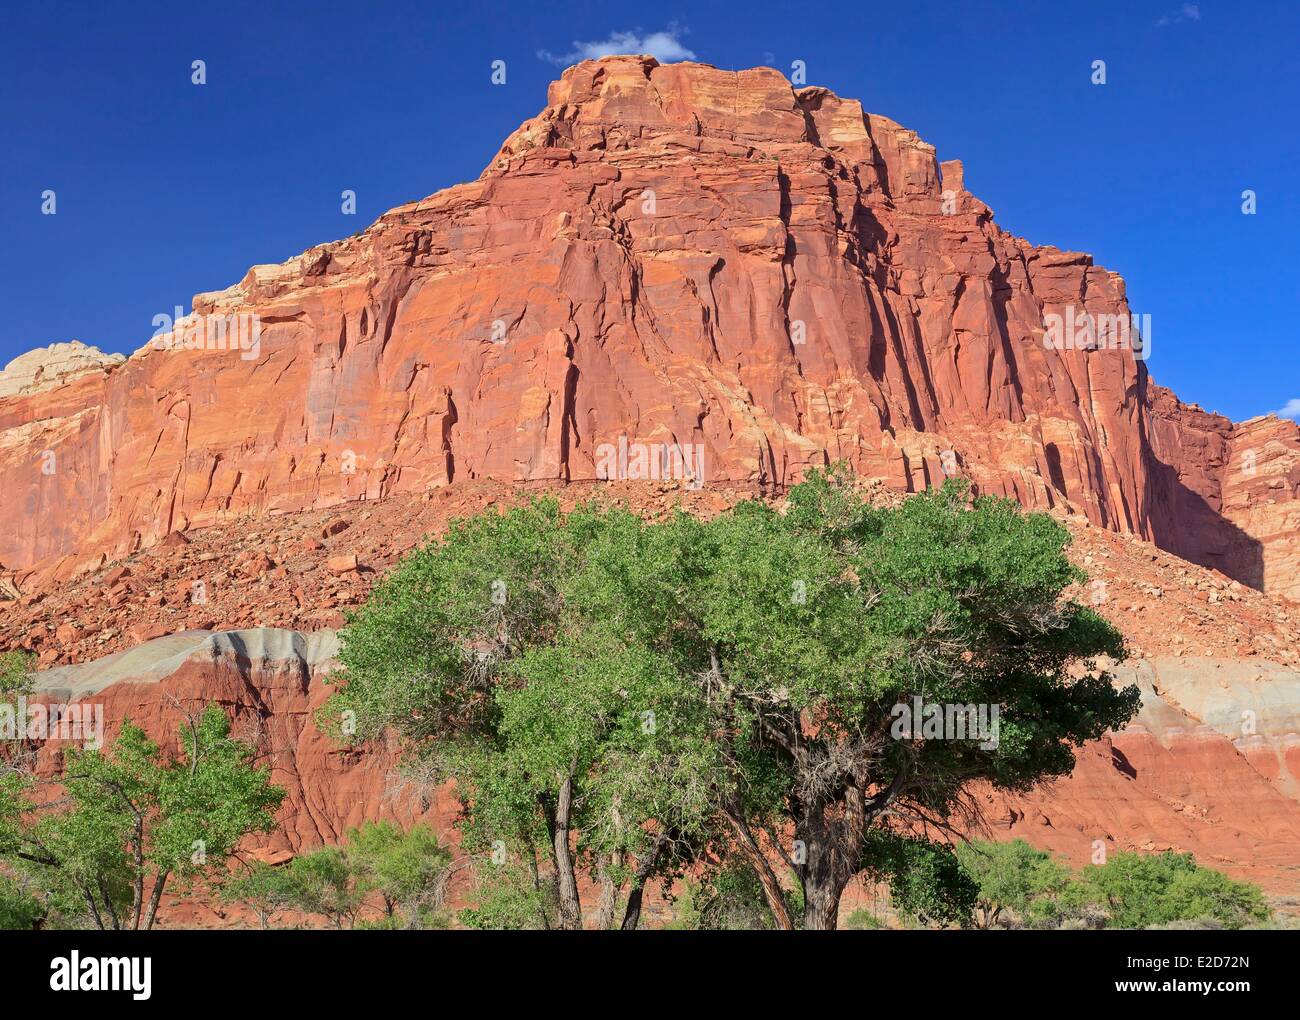 United States Utah Colorado Plateau Capitol Reef National Park Fruita oasis Wingate Sandstone cliff over Castle Meadow from the Stock Photo